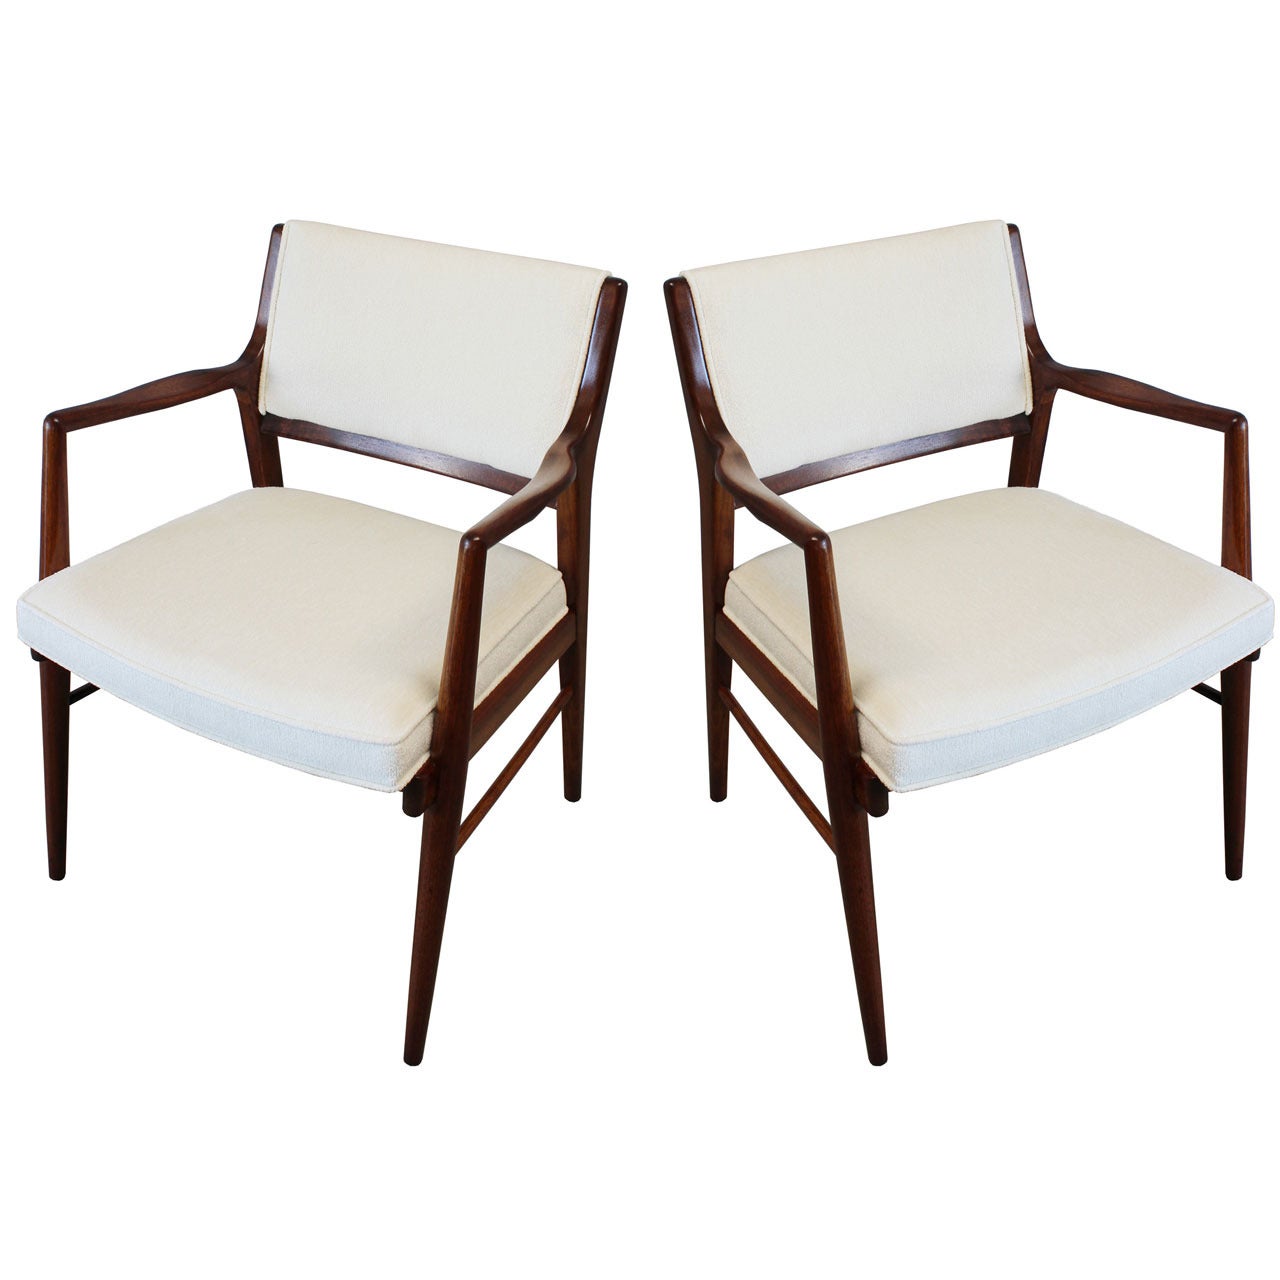 Pair of Jens Risom Armchairs